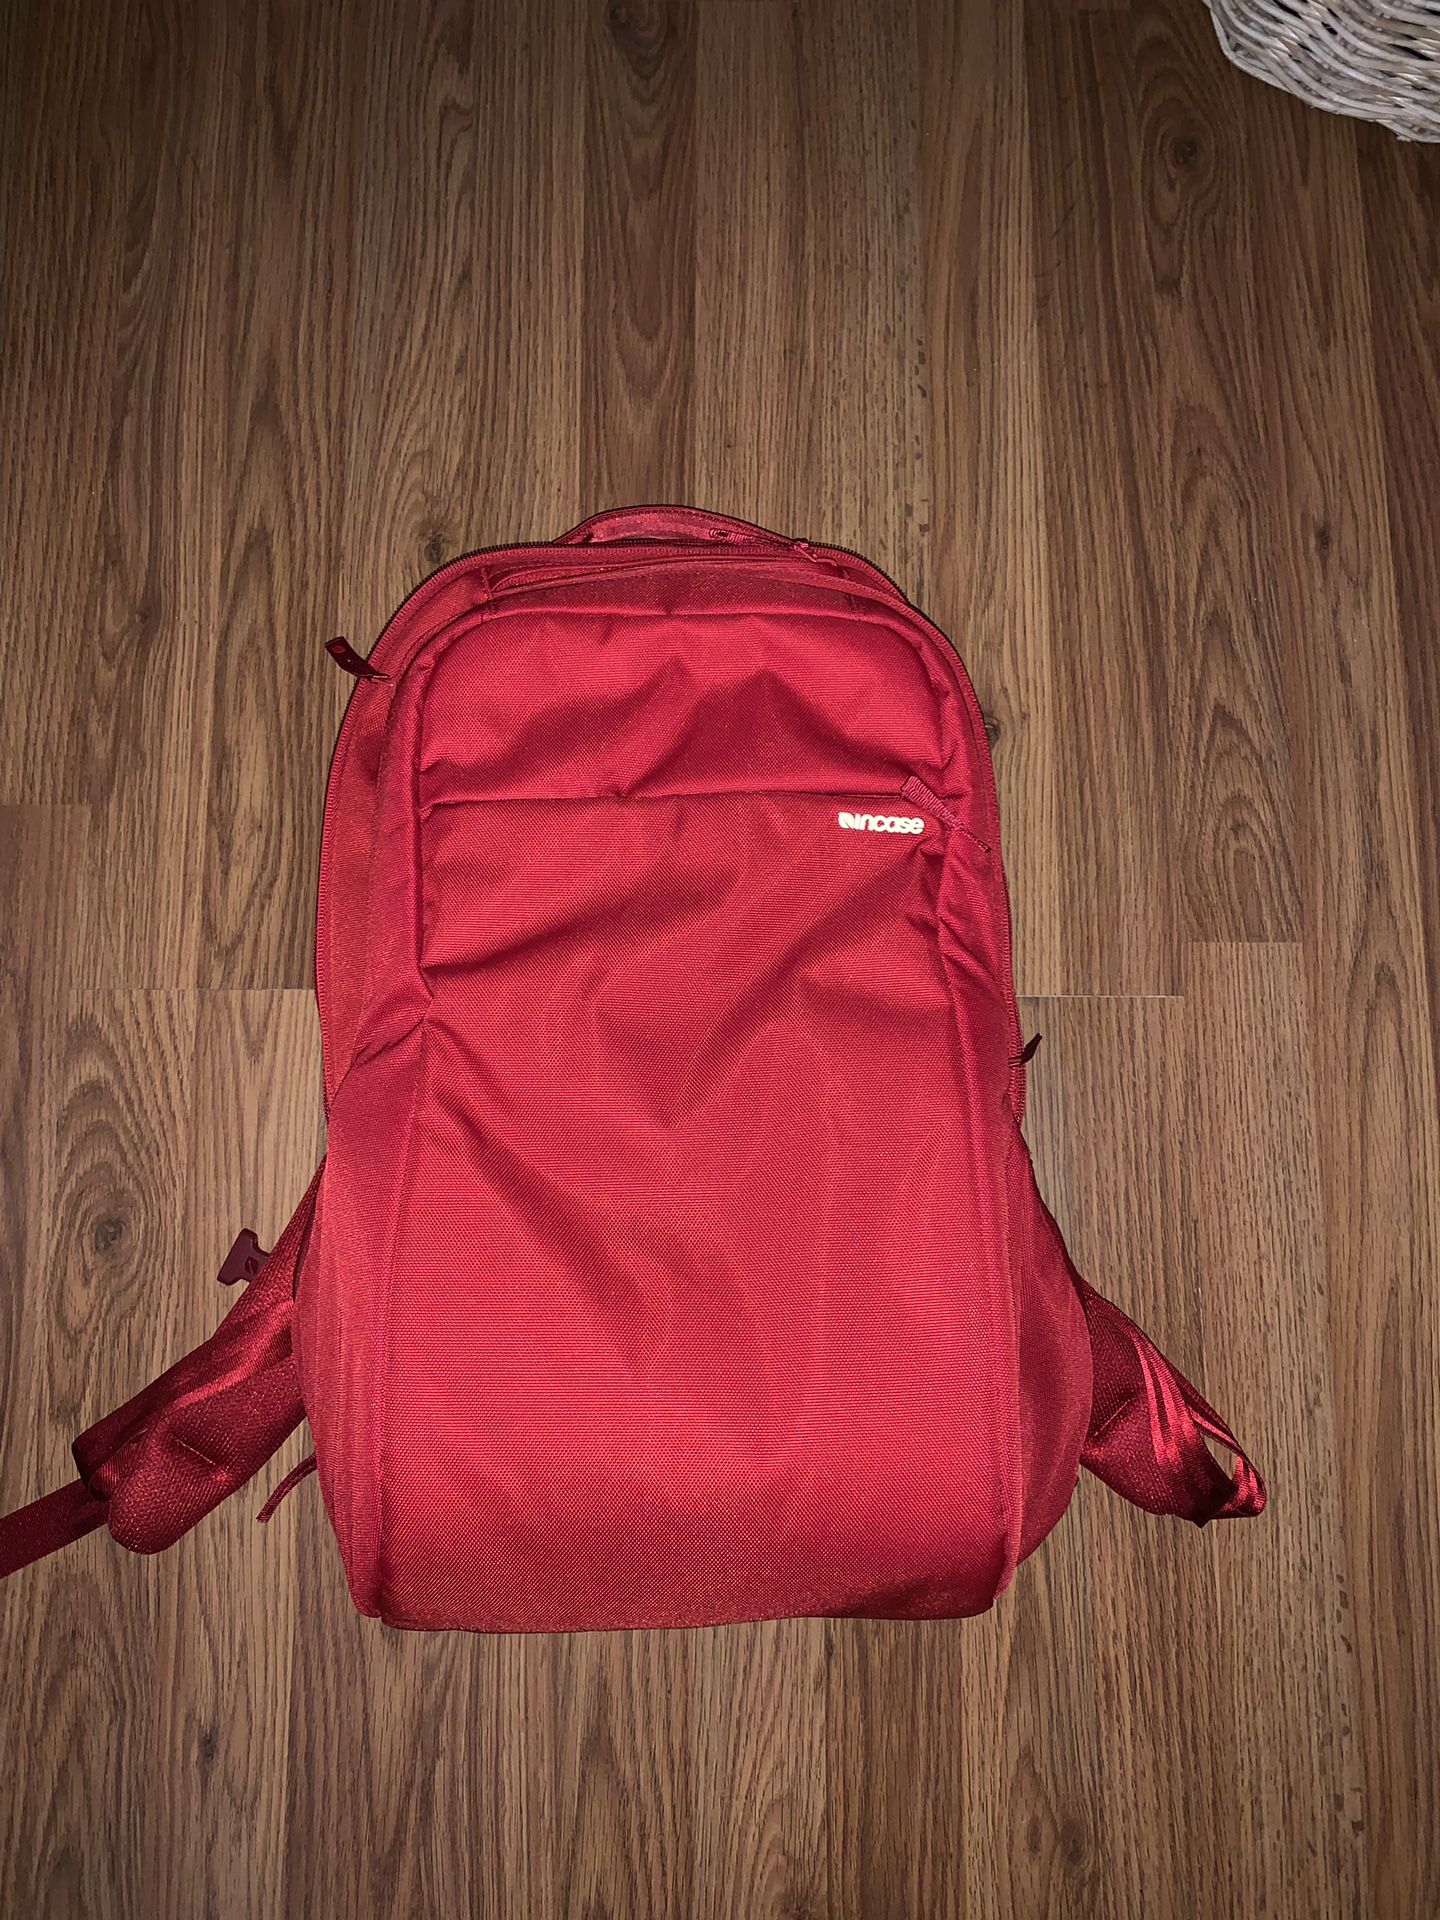 Incase icon backpack